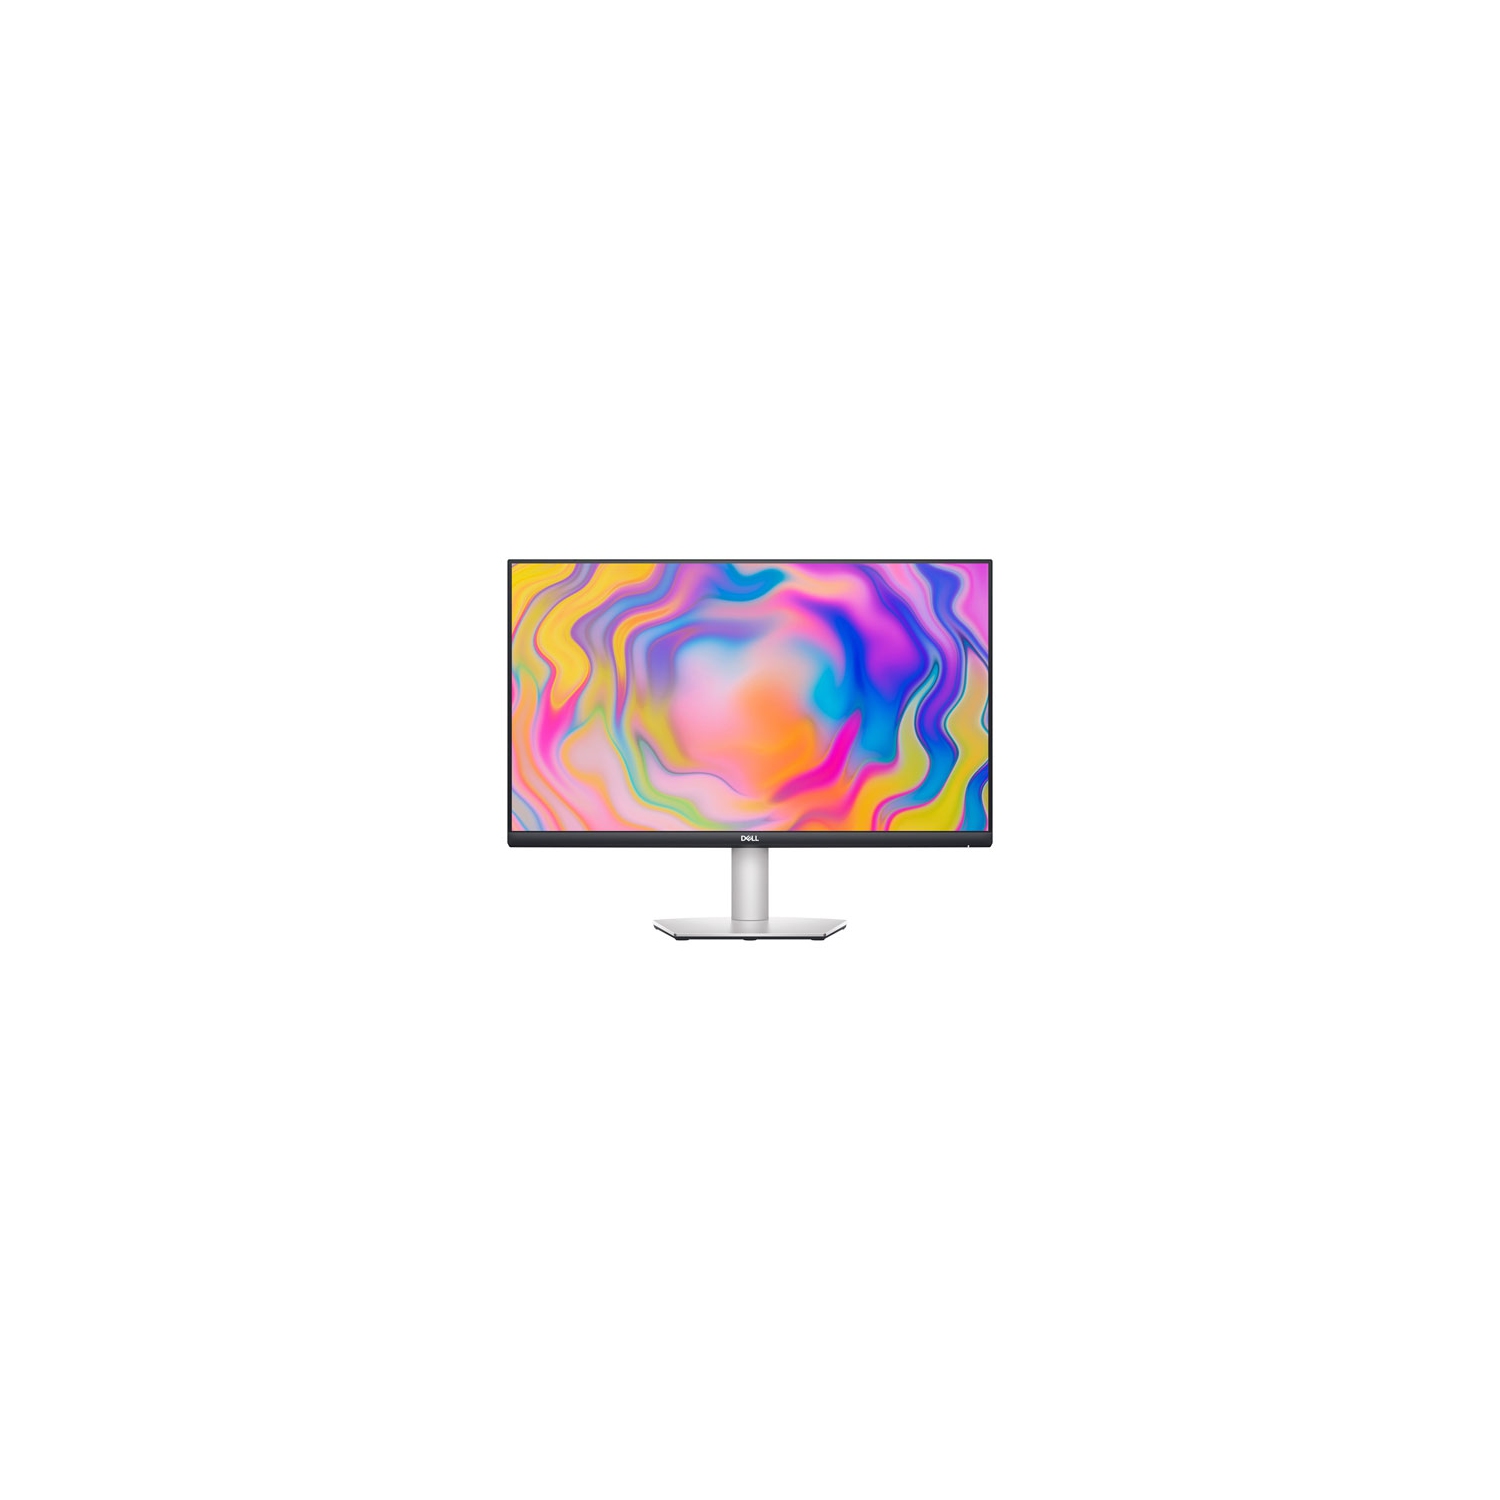 Refurbished (Excellent) - Dell 27" 4K Ultra HD 60Hz 4ms GTG IPS LED FreeSync Monitor (S2722QC) - Platinum Silver